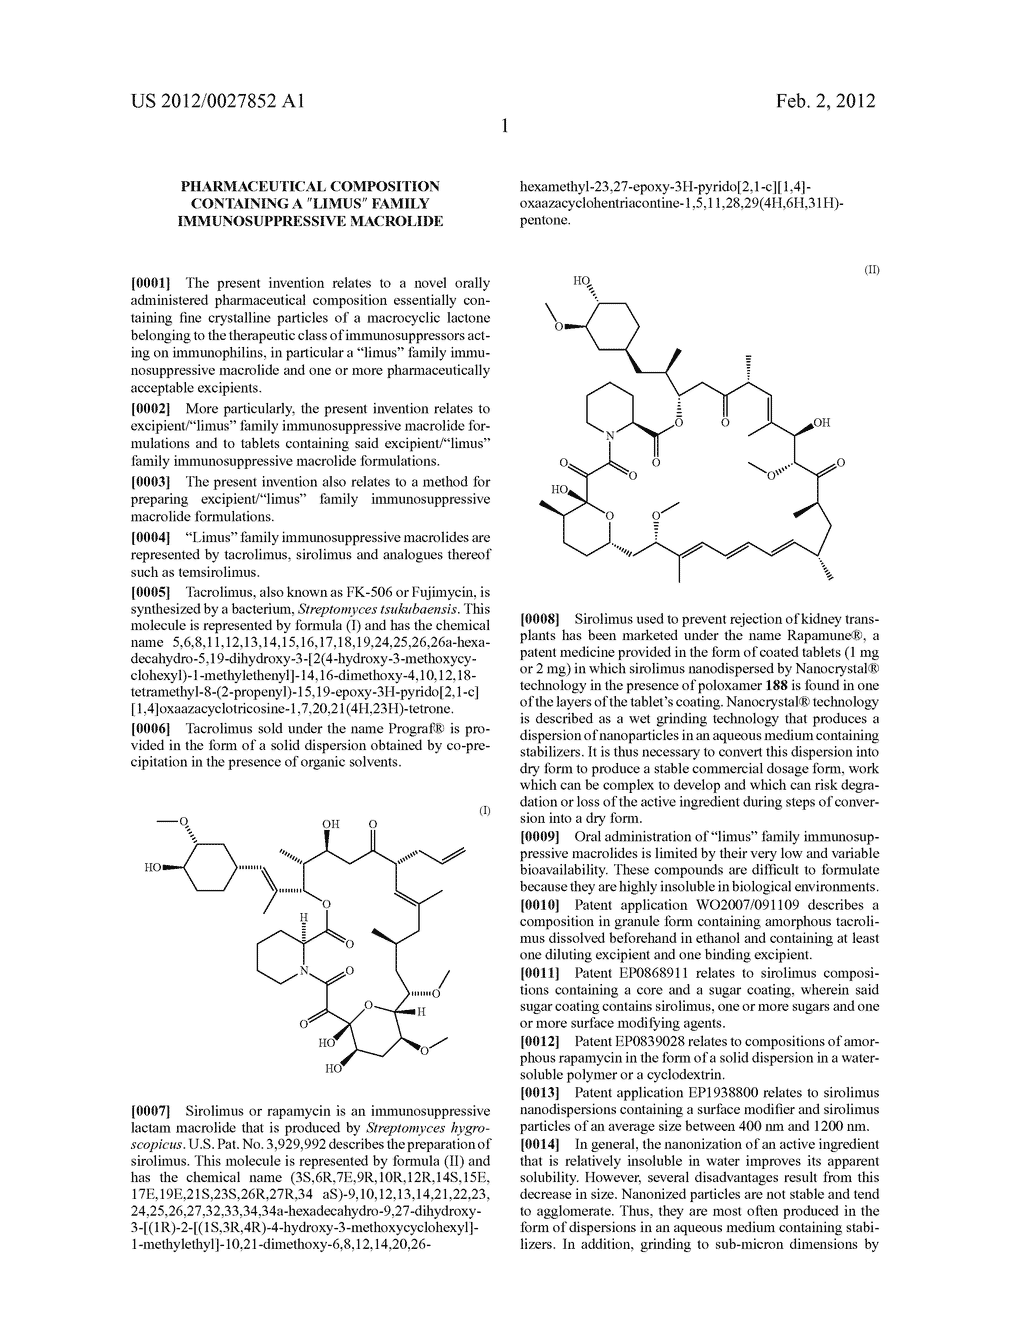 PHARMACEUTICAL COMPOSITION CONTAINING A 